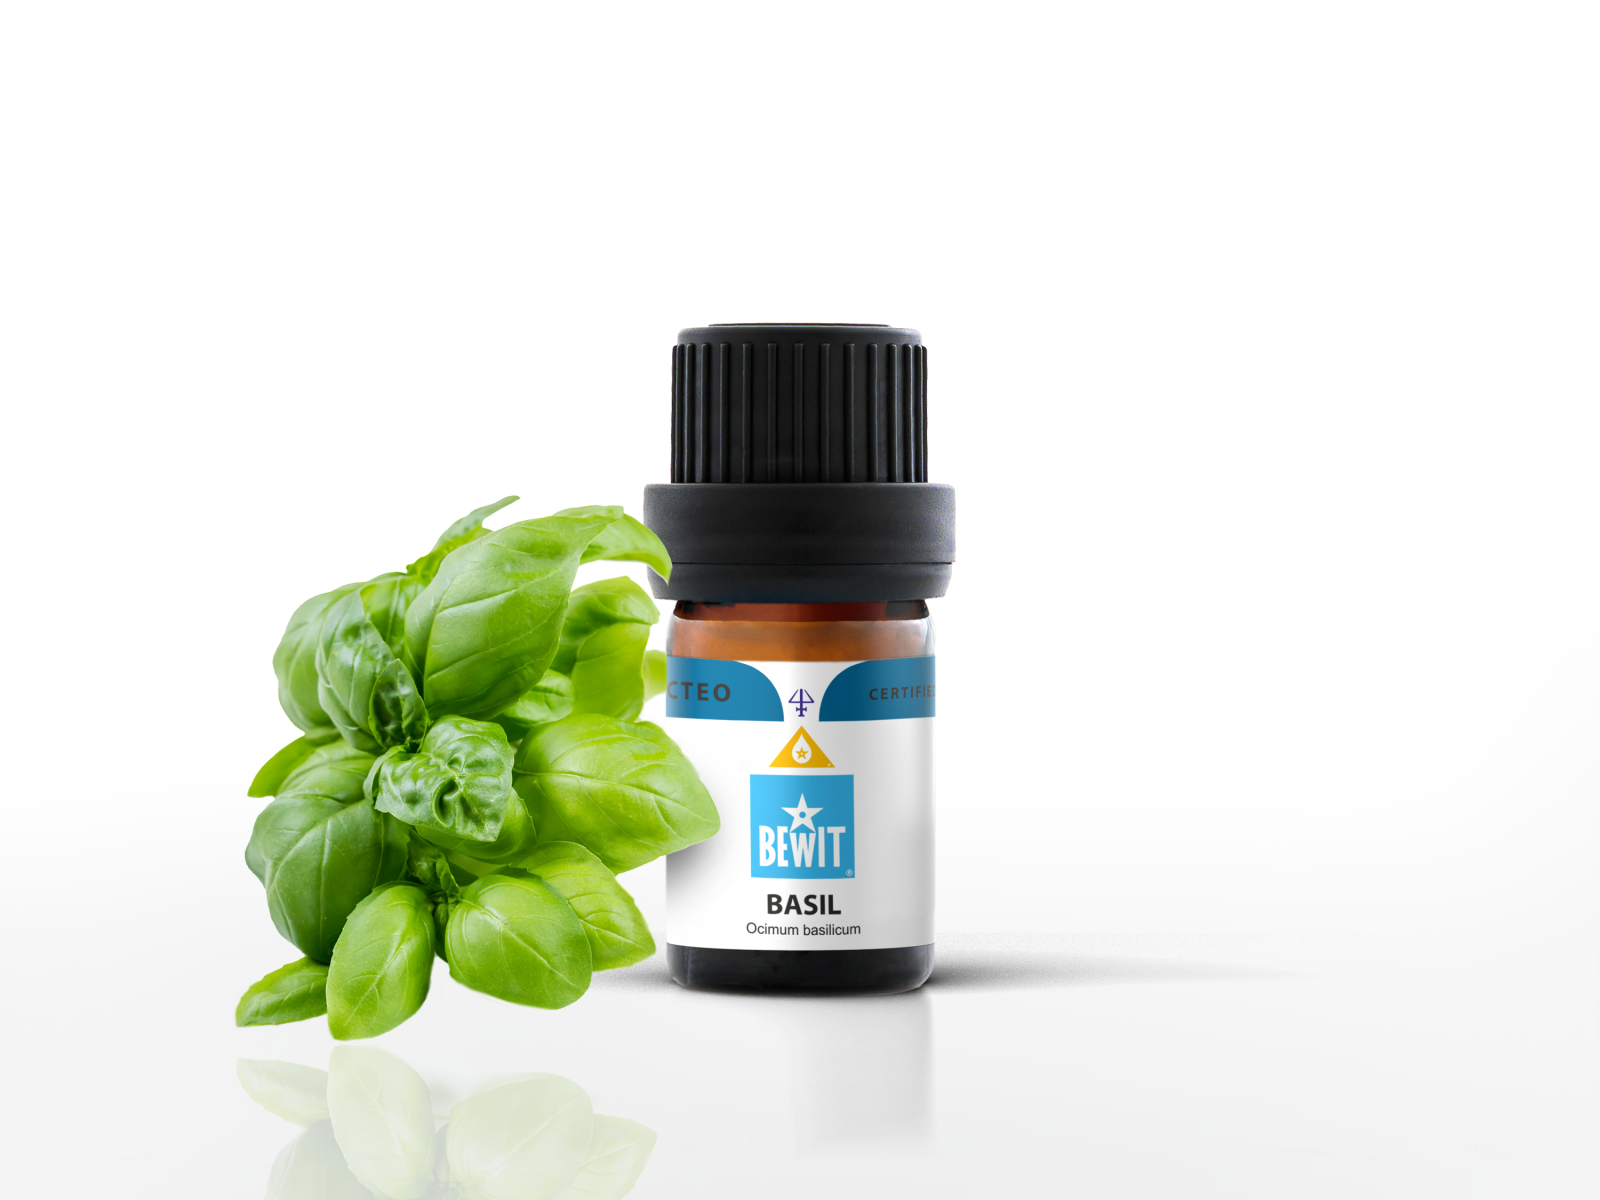 BEWIT Basil. - This is a 100% pure essential oil - 2